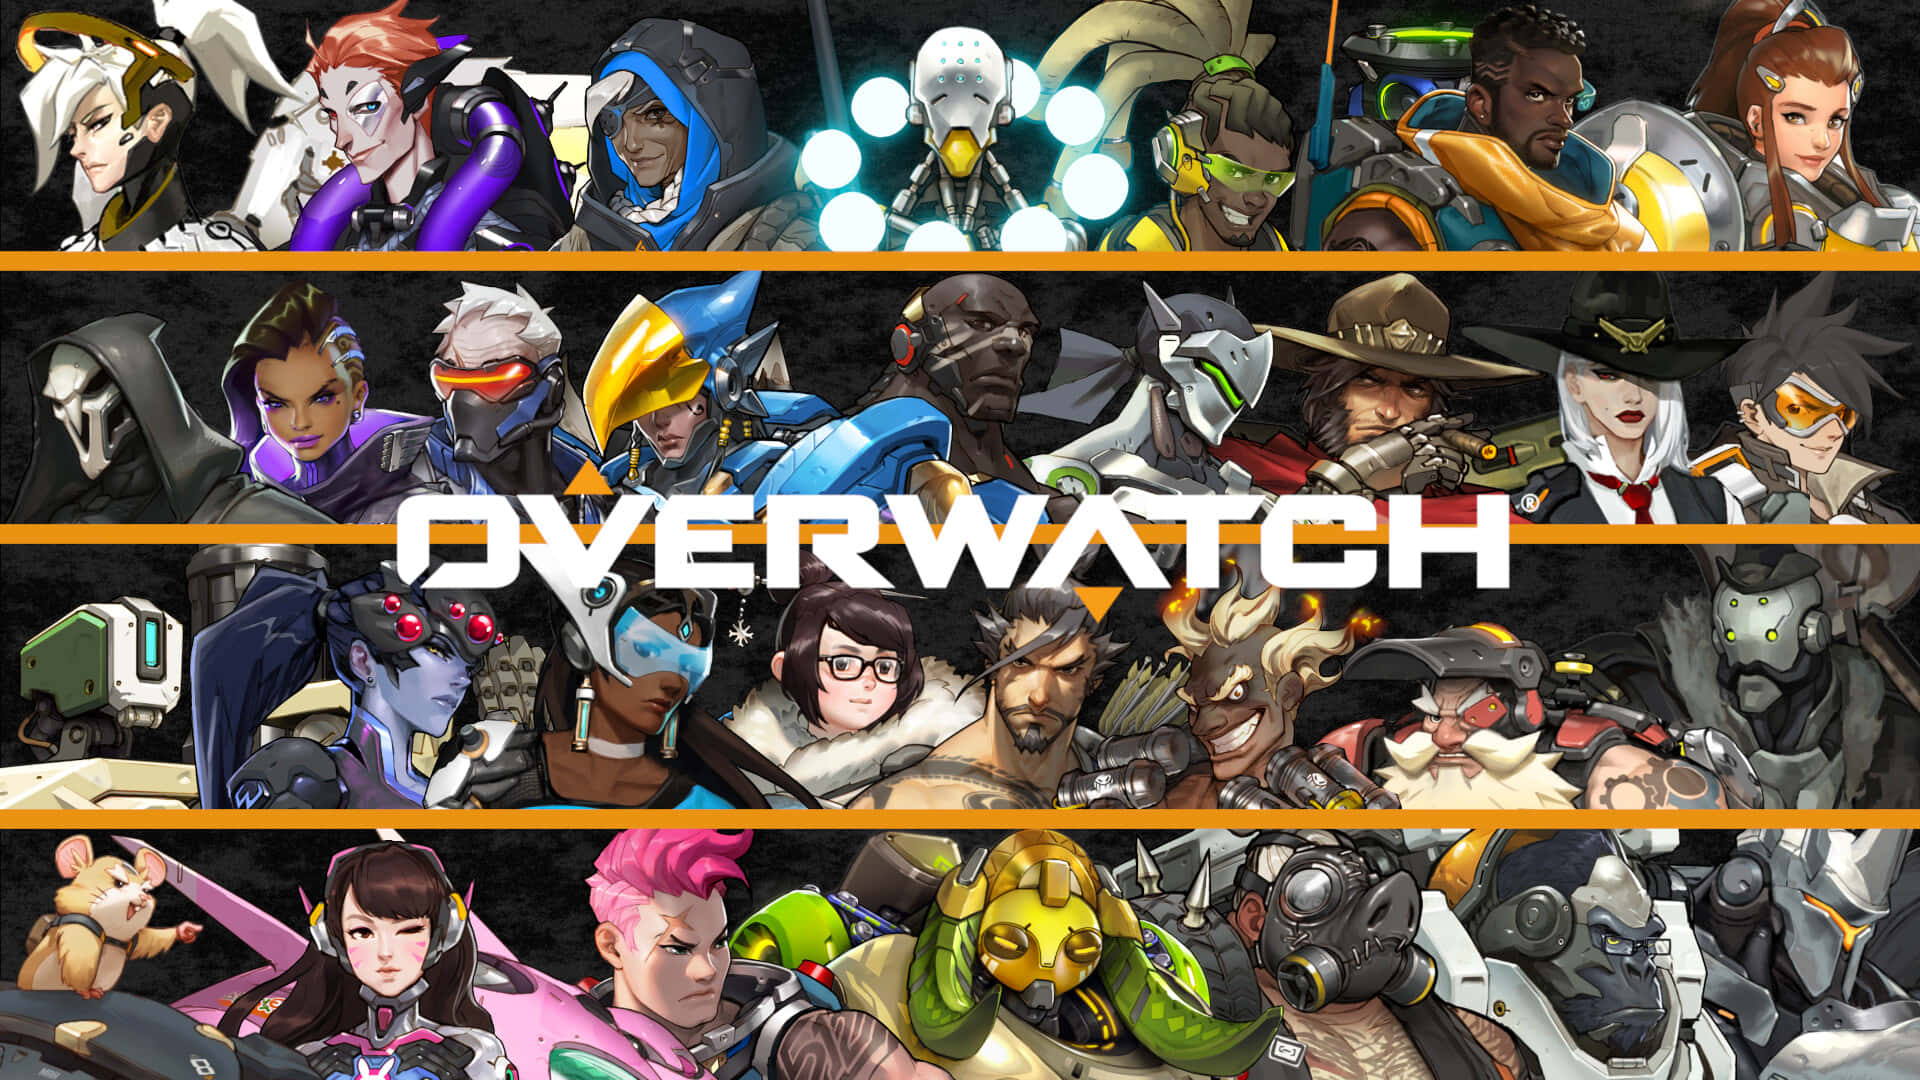 Celebrate Overwatch's Anniversary with a Wallpaper